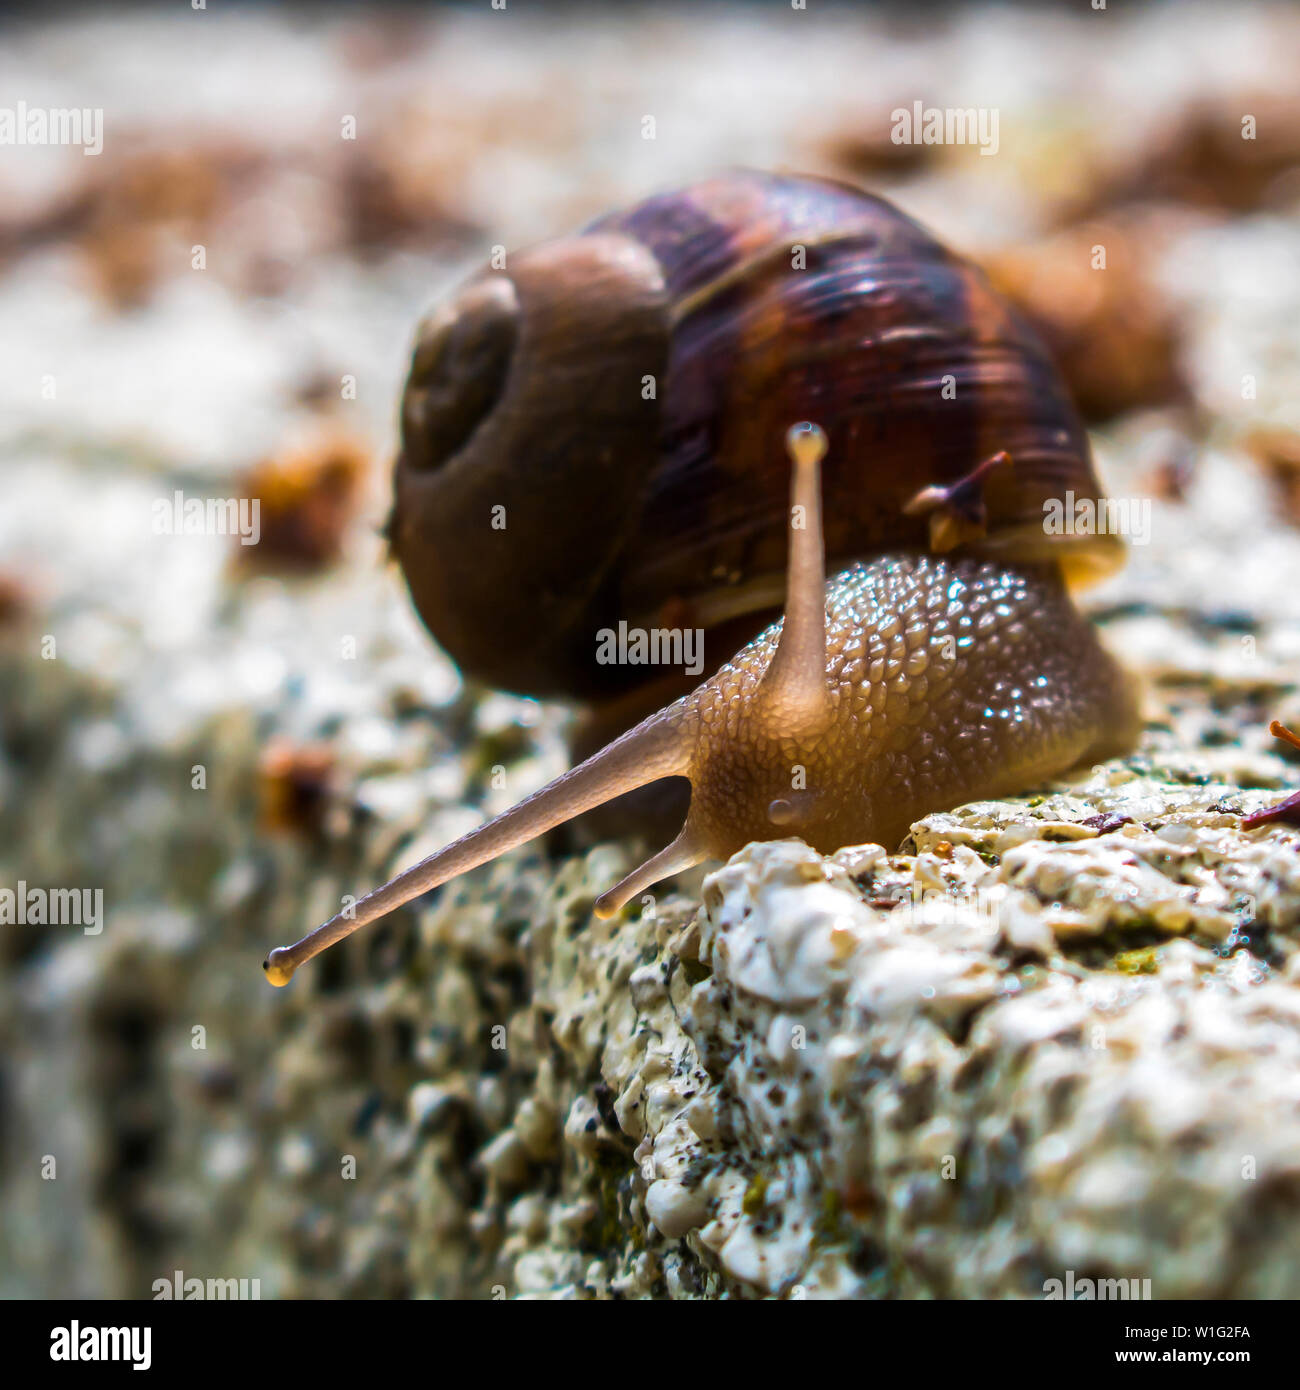 Close up common garden stail with light glowing in body and tentacles. Stock Photo